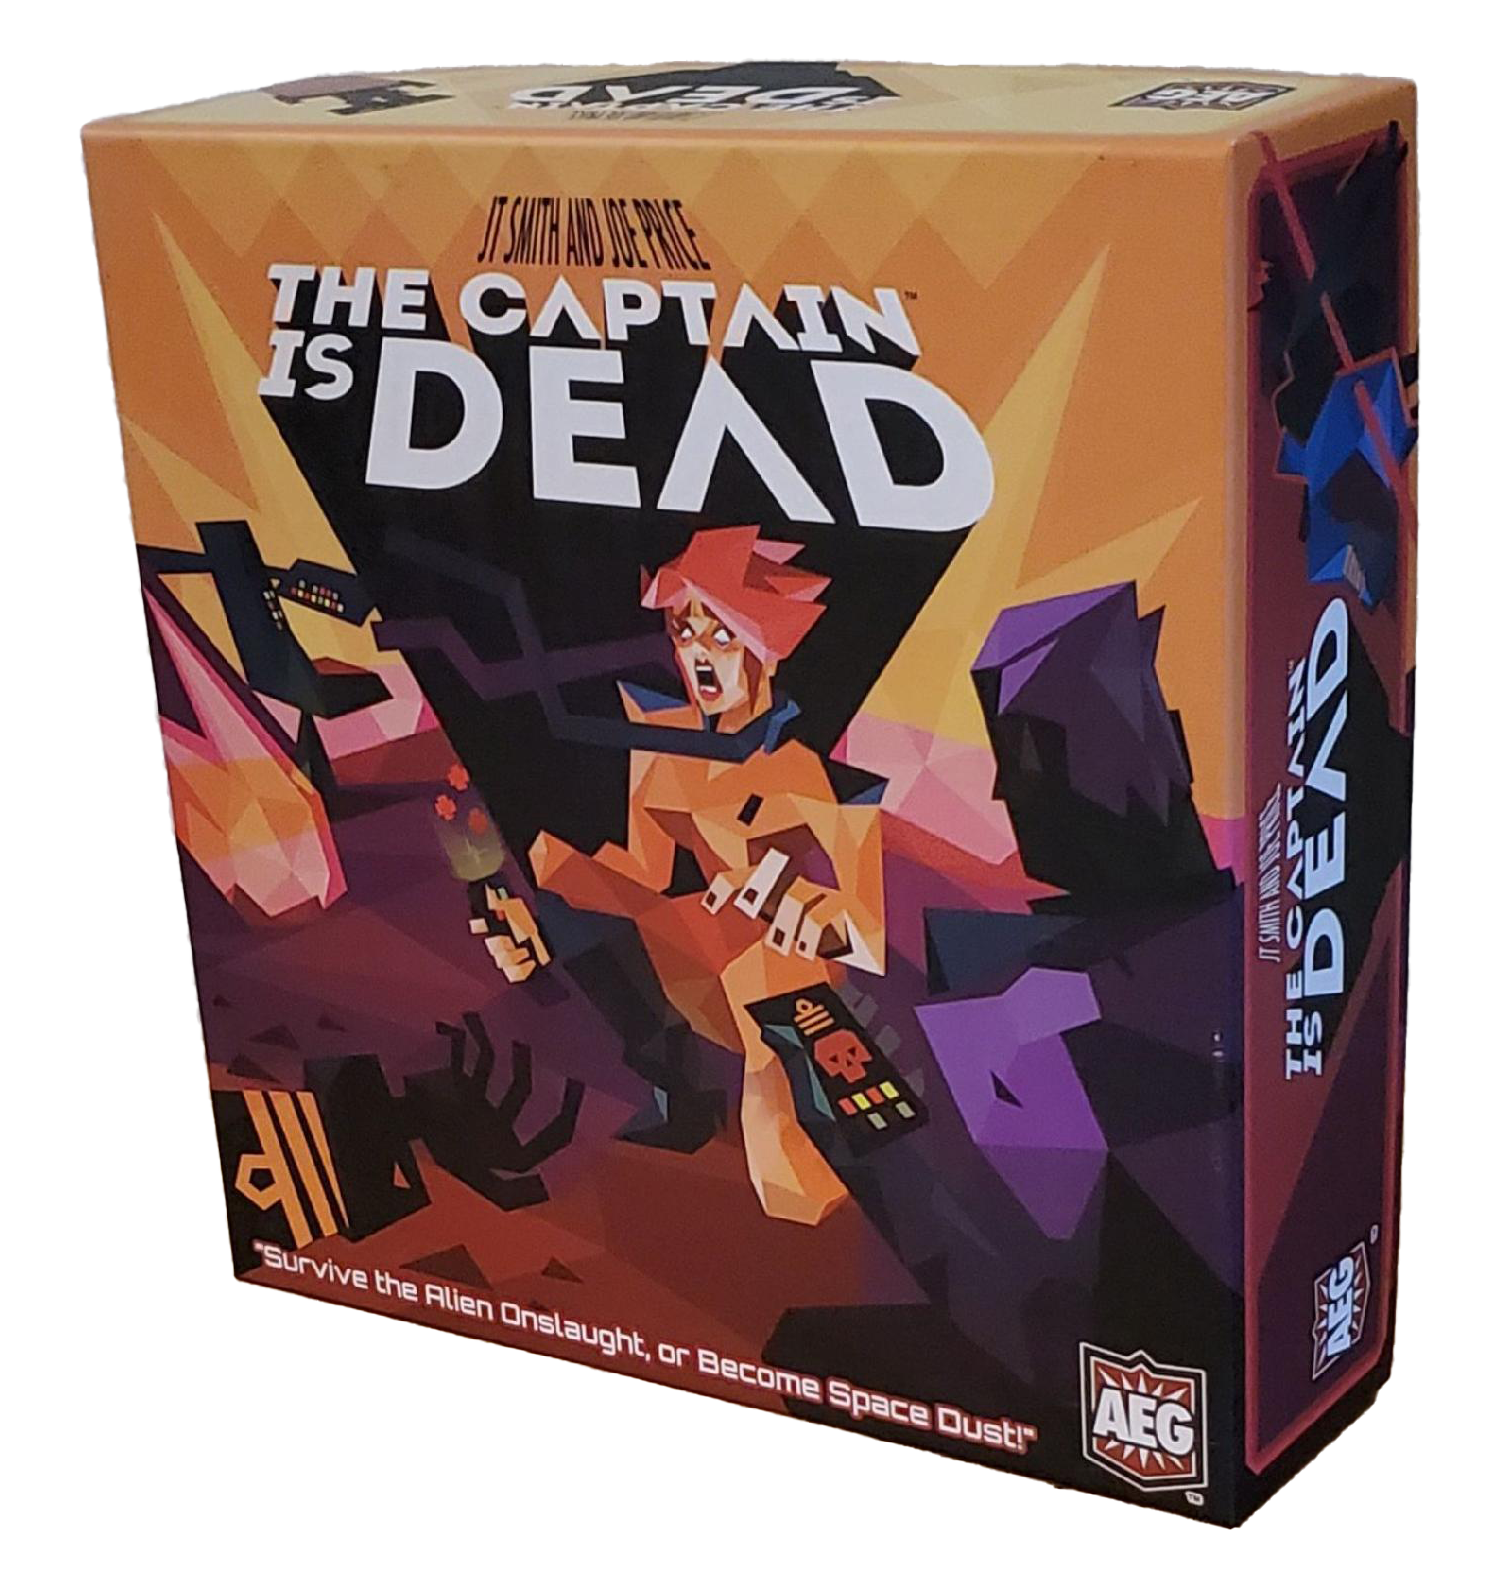 The Captain is Dead board game by Alderac Entertainment Games